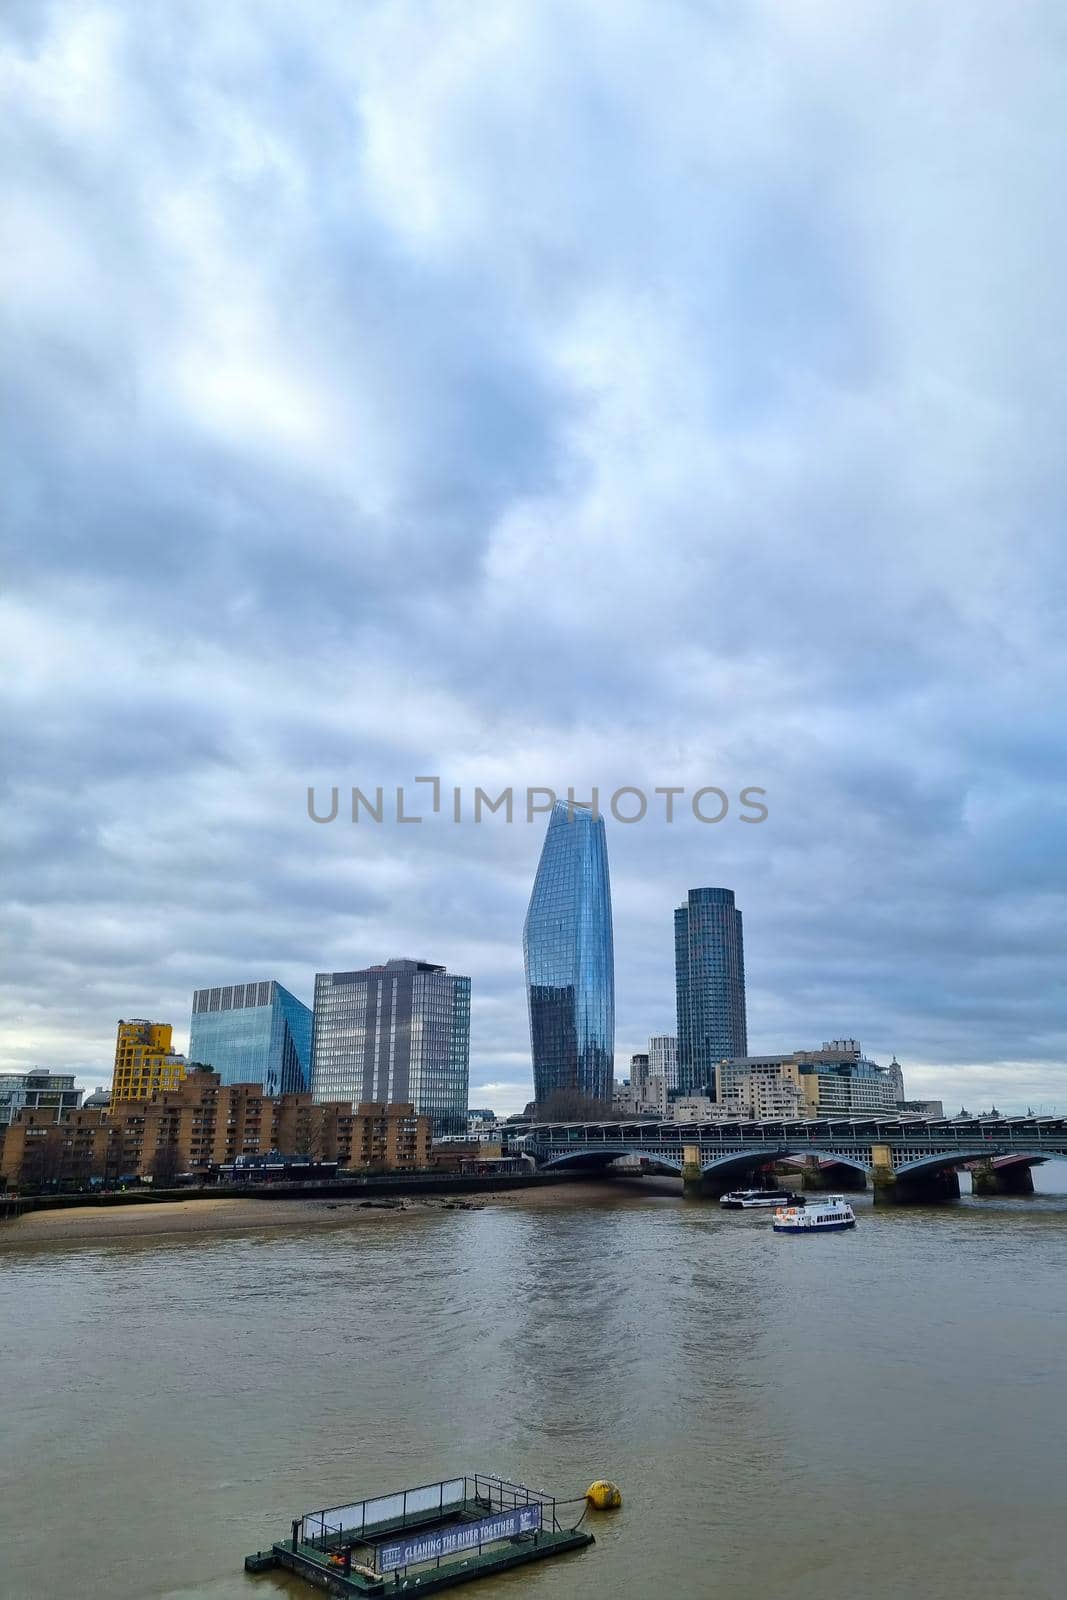 London, United Kingdom, February 4, 2022: view of modern high-rise buildings in London